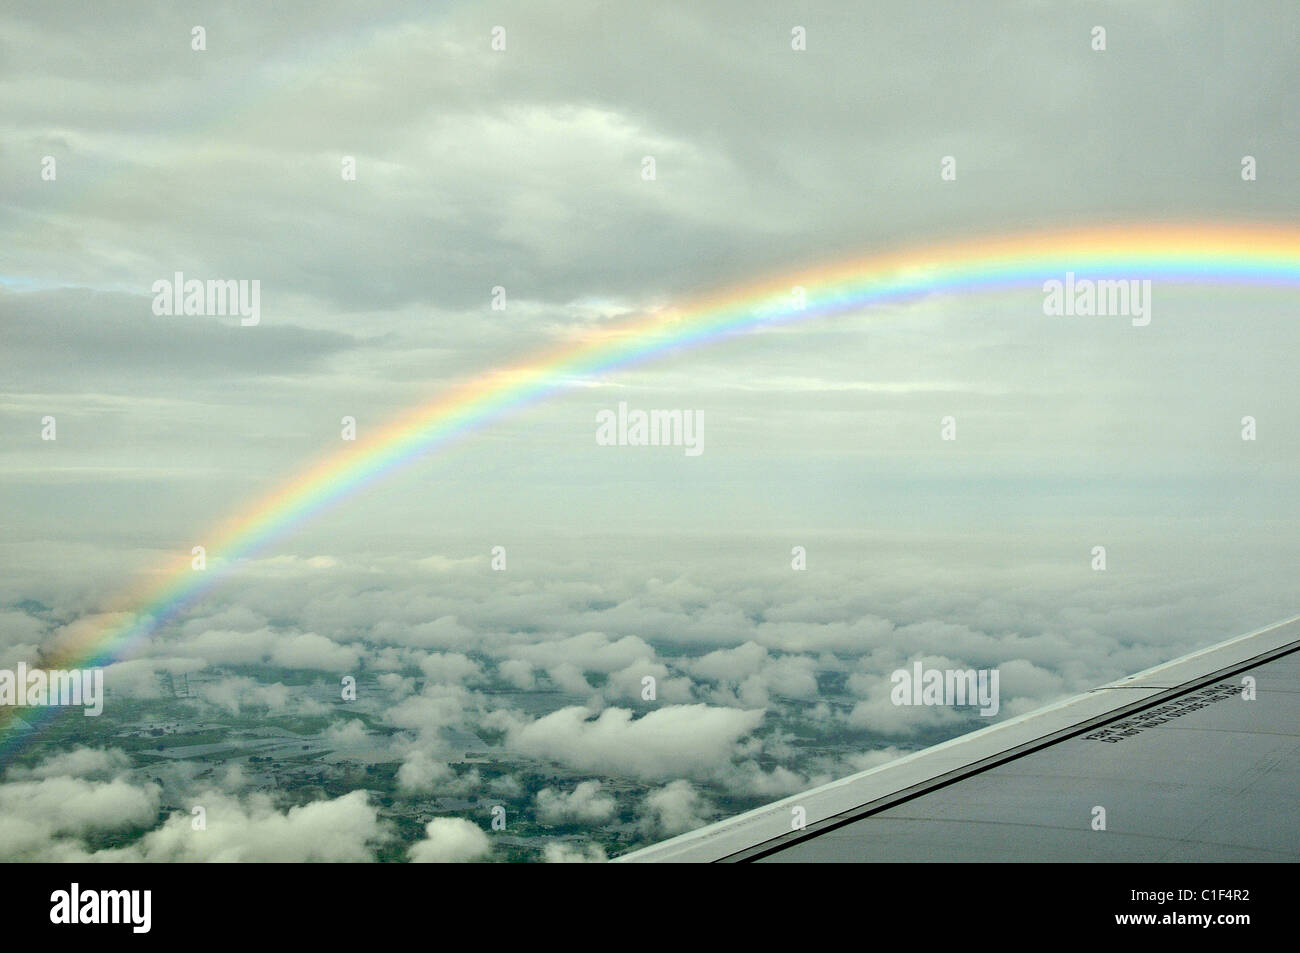 wing of airplane and rainbow Stock Photo